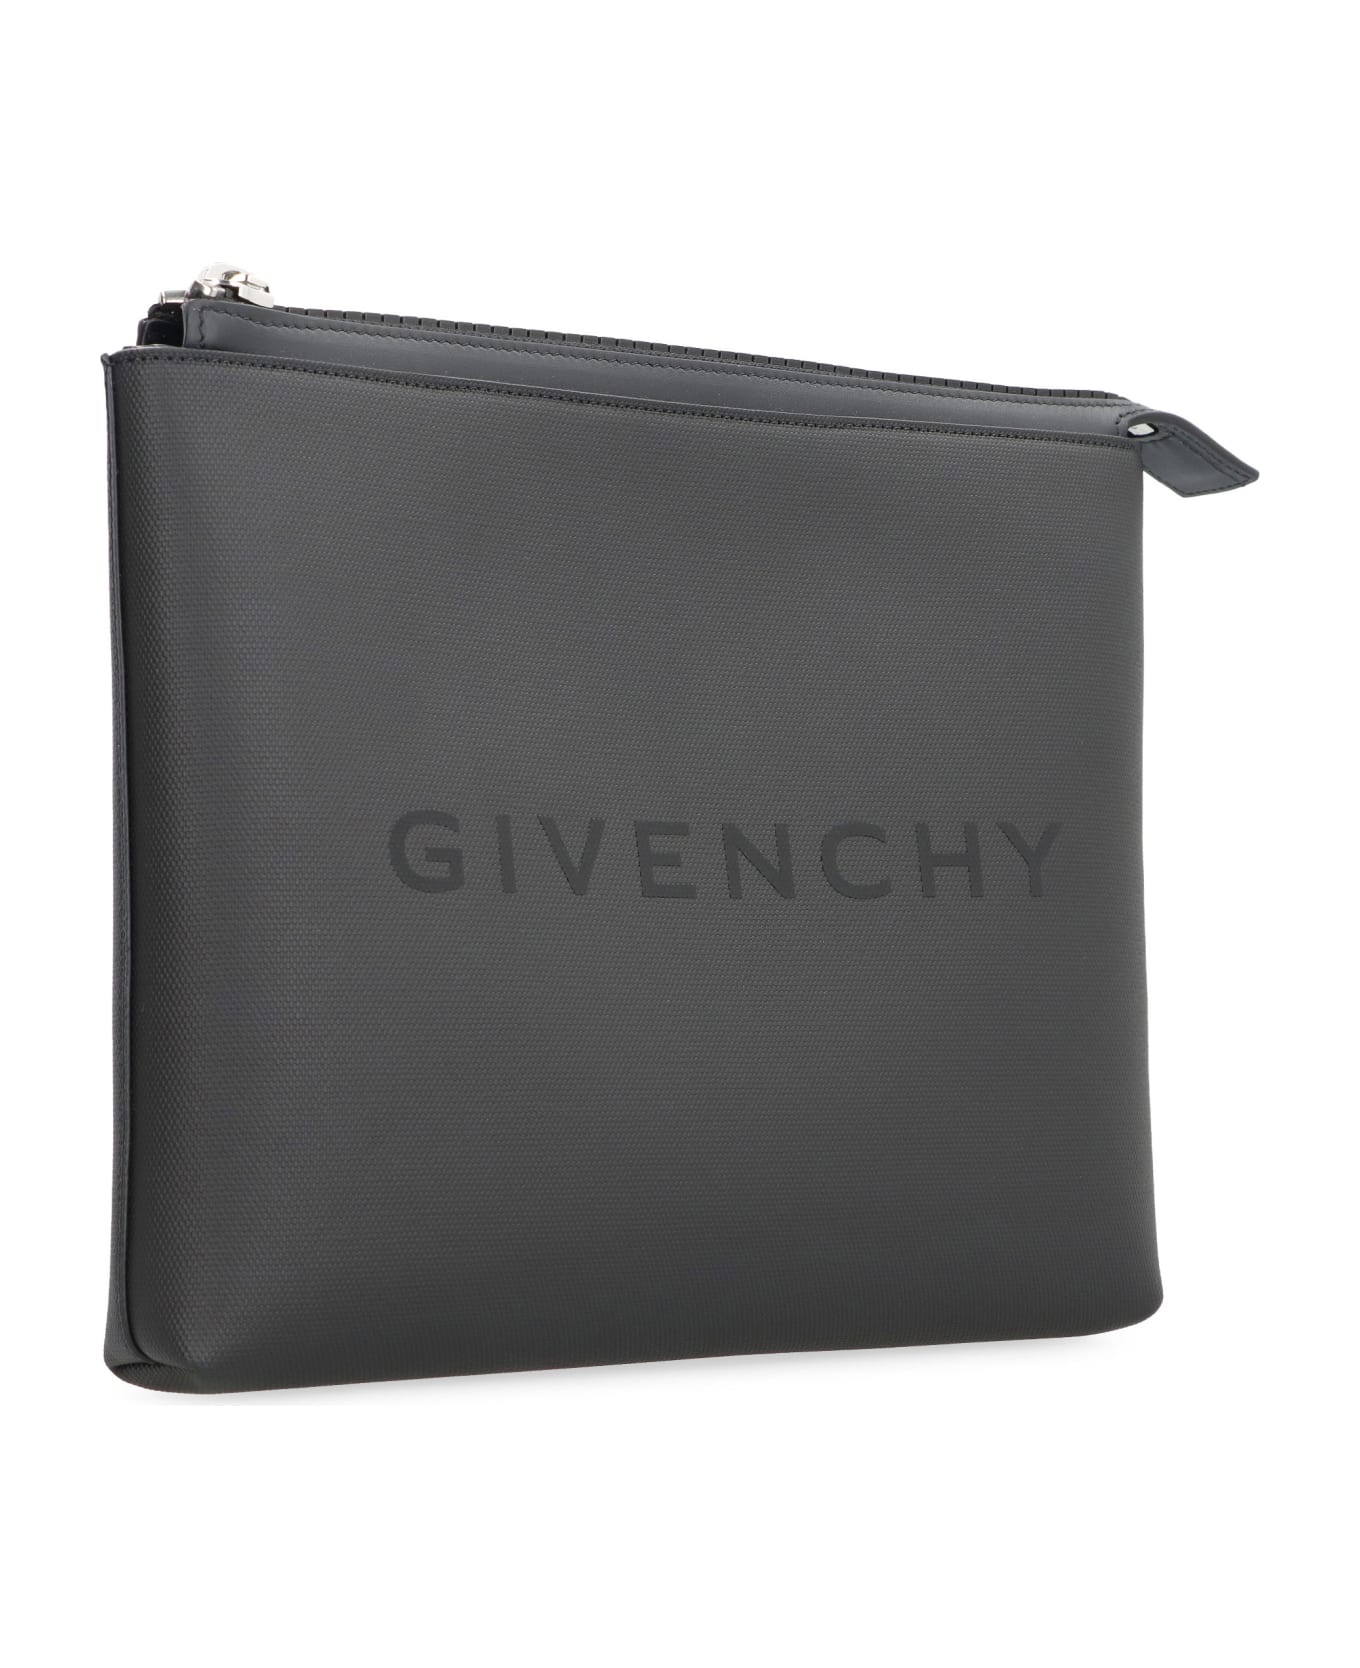 Givenchy Coated Canvas Flat Pouch - Black